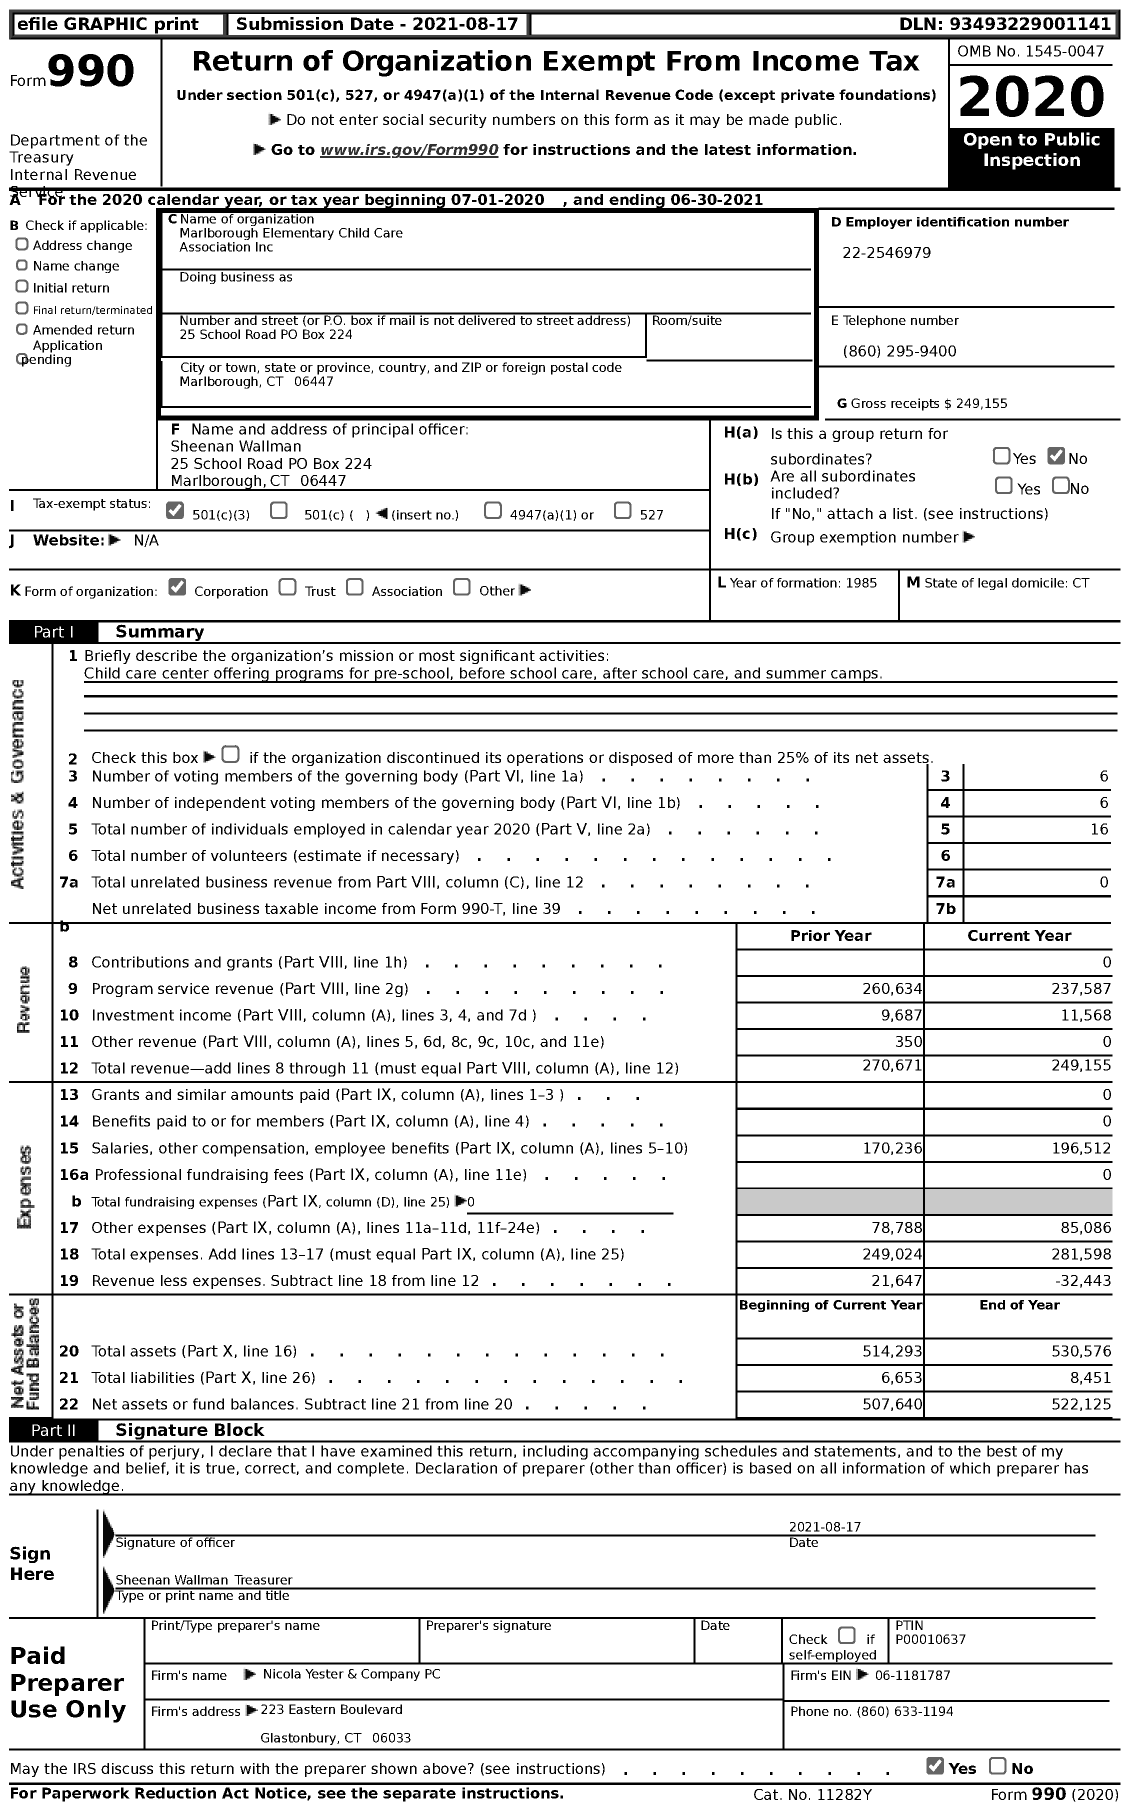 Image of first page of 2020 Form 990 for Marlborough Elementary Child Care Association